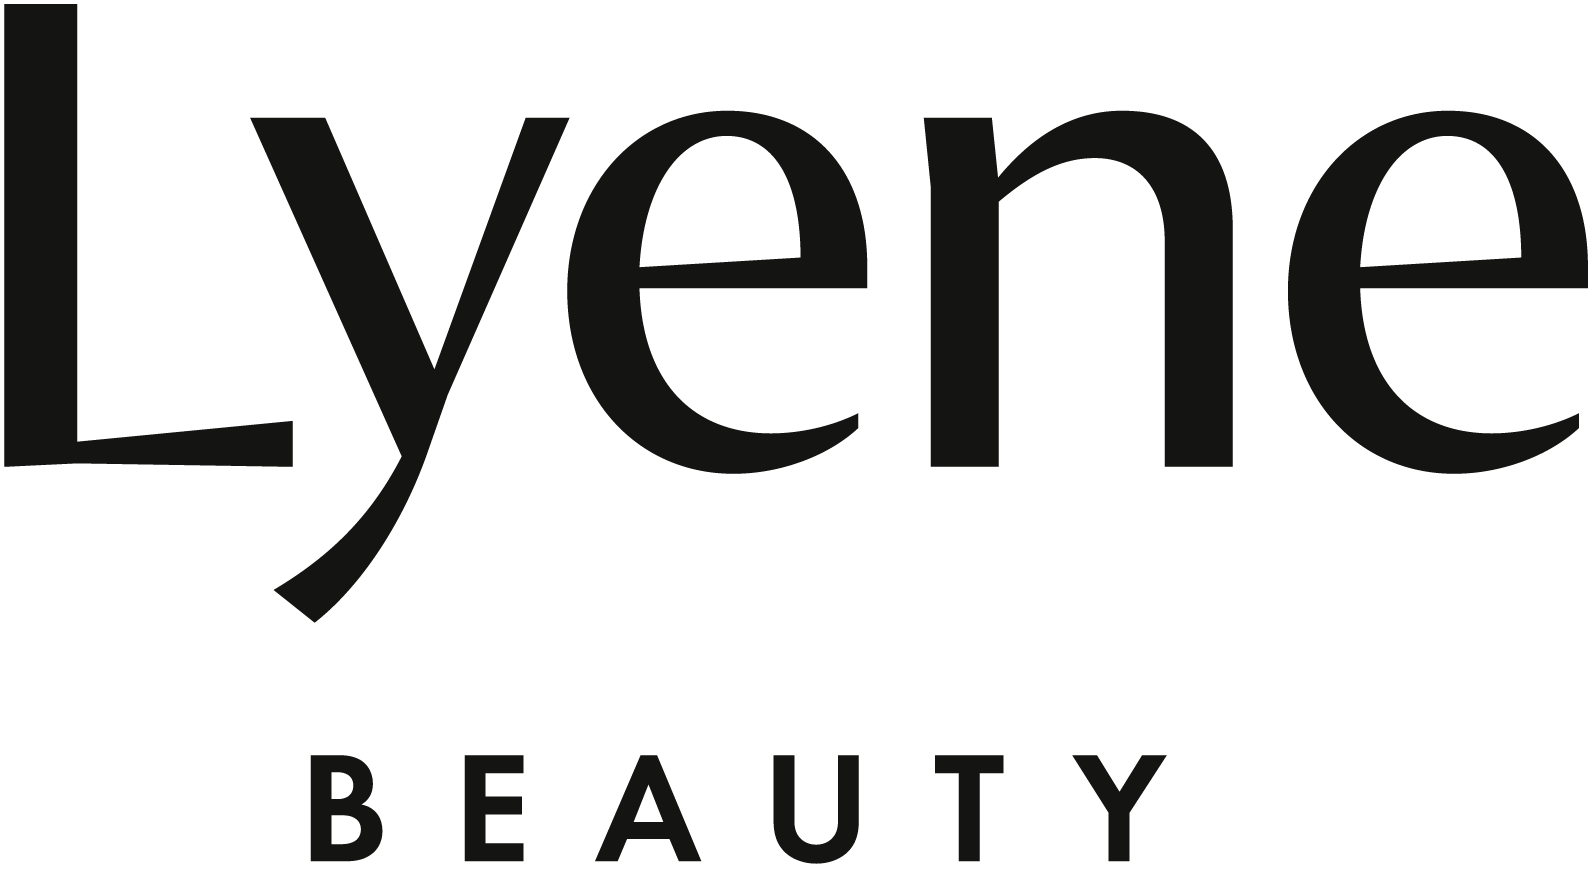 Lyenebeauty Logo in black with white background. Lyenebeauty skincare and makeup.